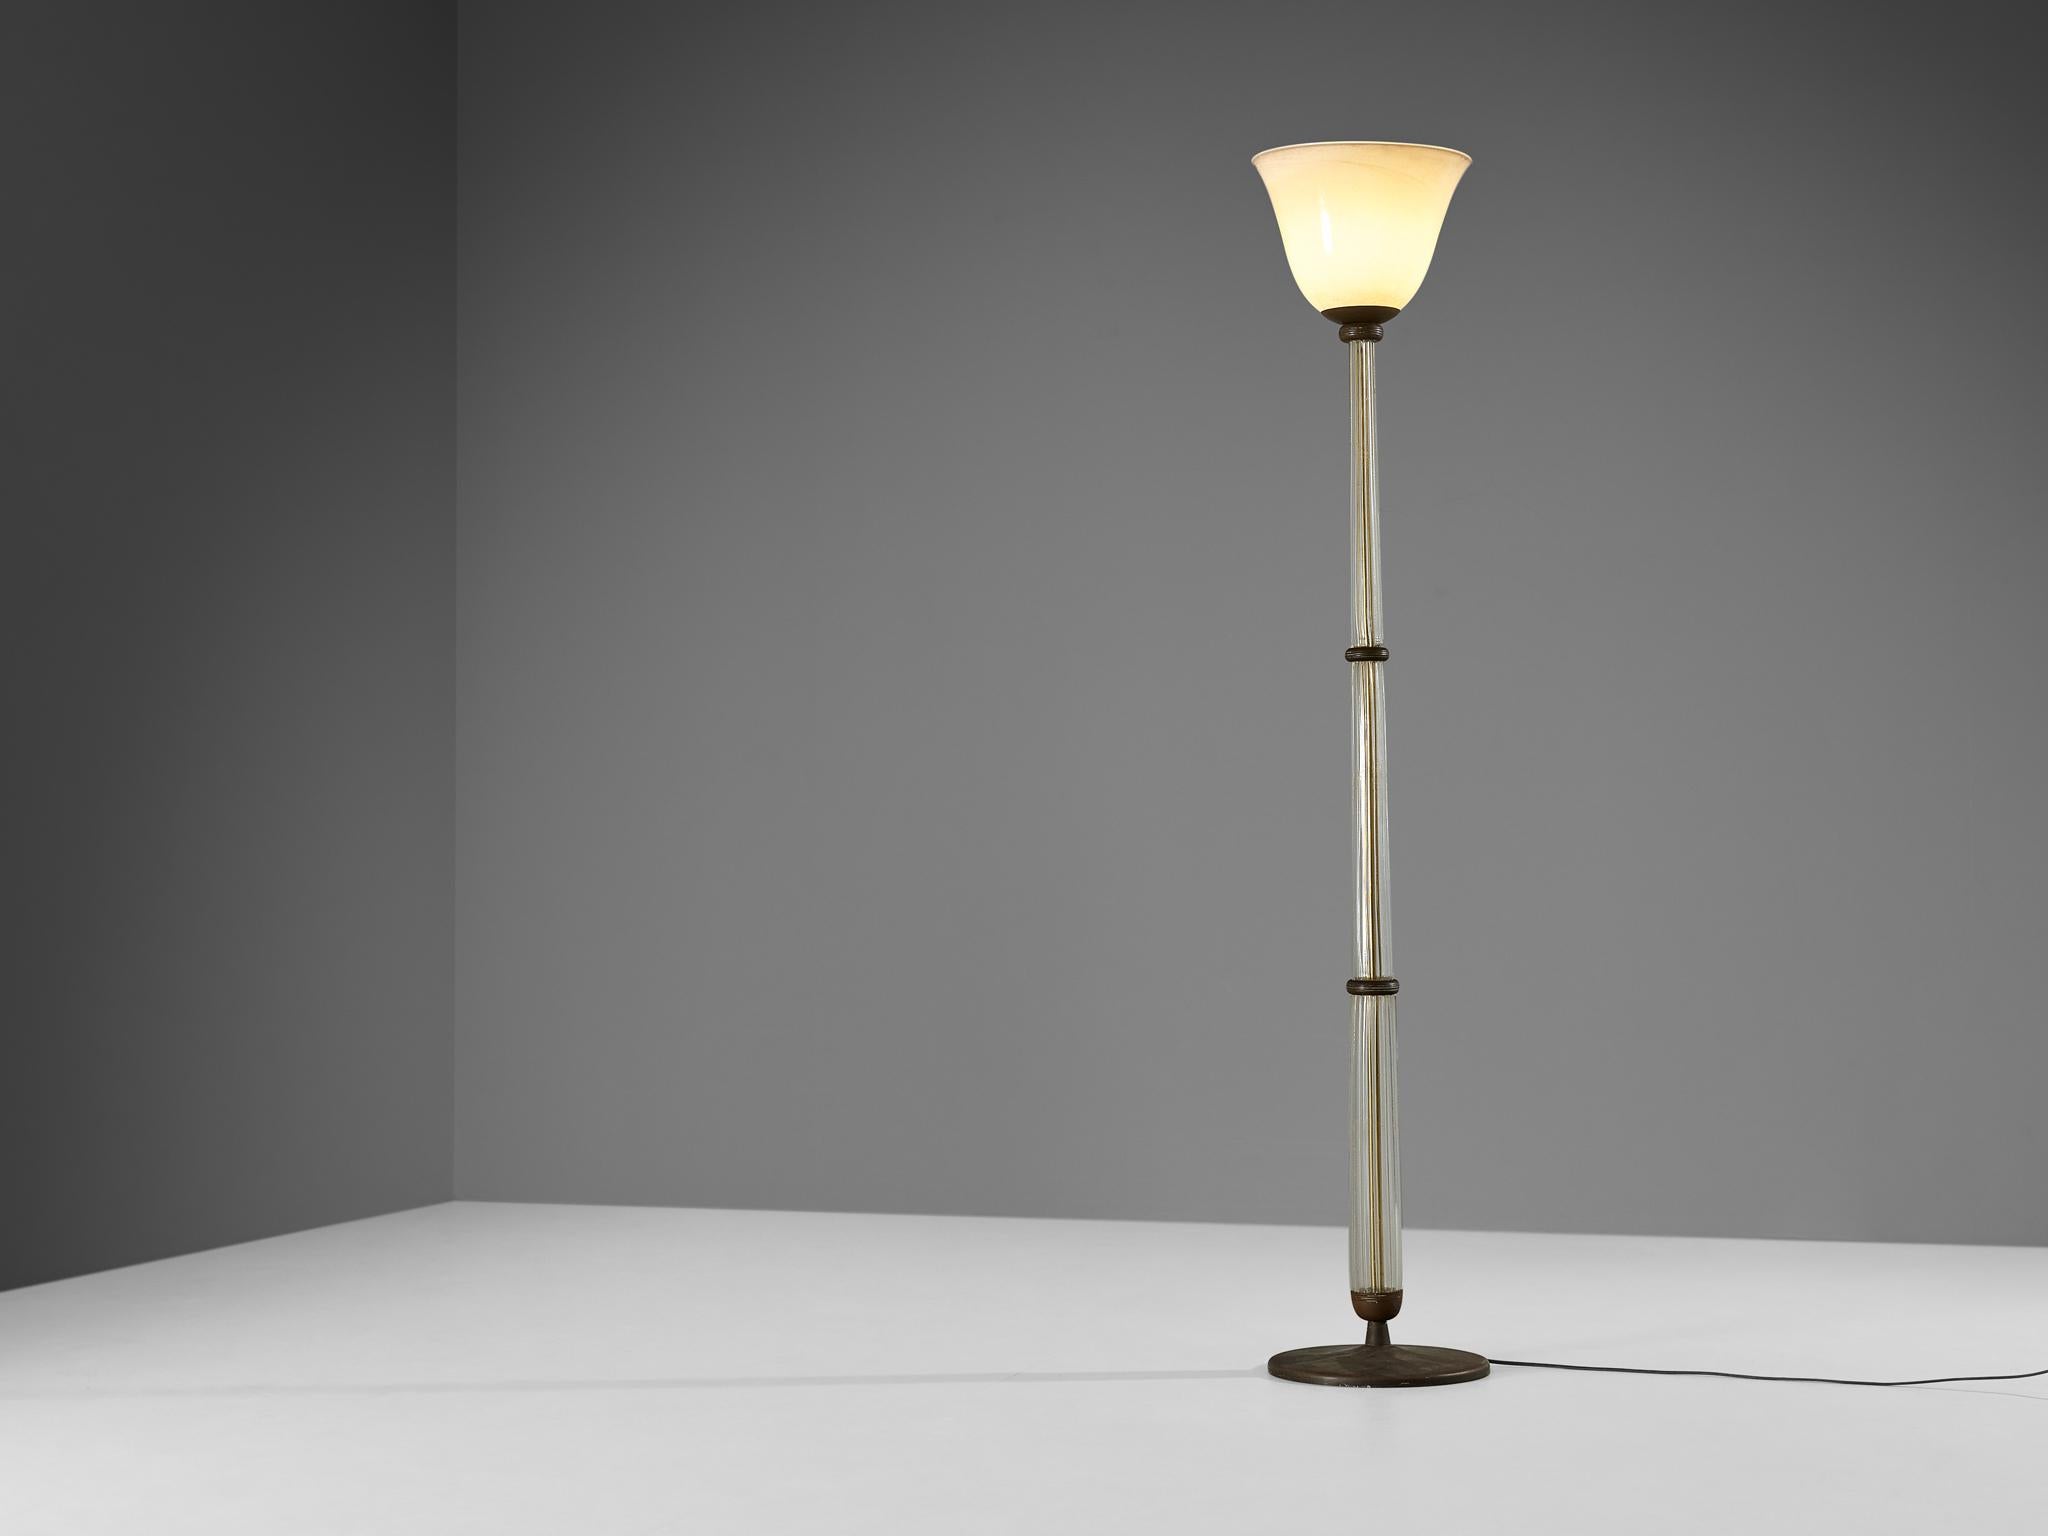 Tomaso Buzzi for Venini, floor lamp, model '502', glass, brass, gold leaf, Italy, 1933-38

A truly magnificent Italian floor lamp designed by the Milanese multidisciplinary artist Tomasso Buzzi (1900-1981) for the esteemed glass company Venini. With